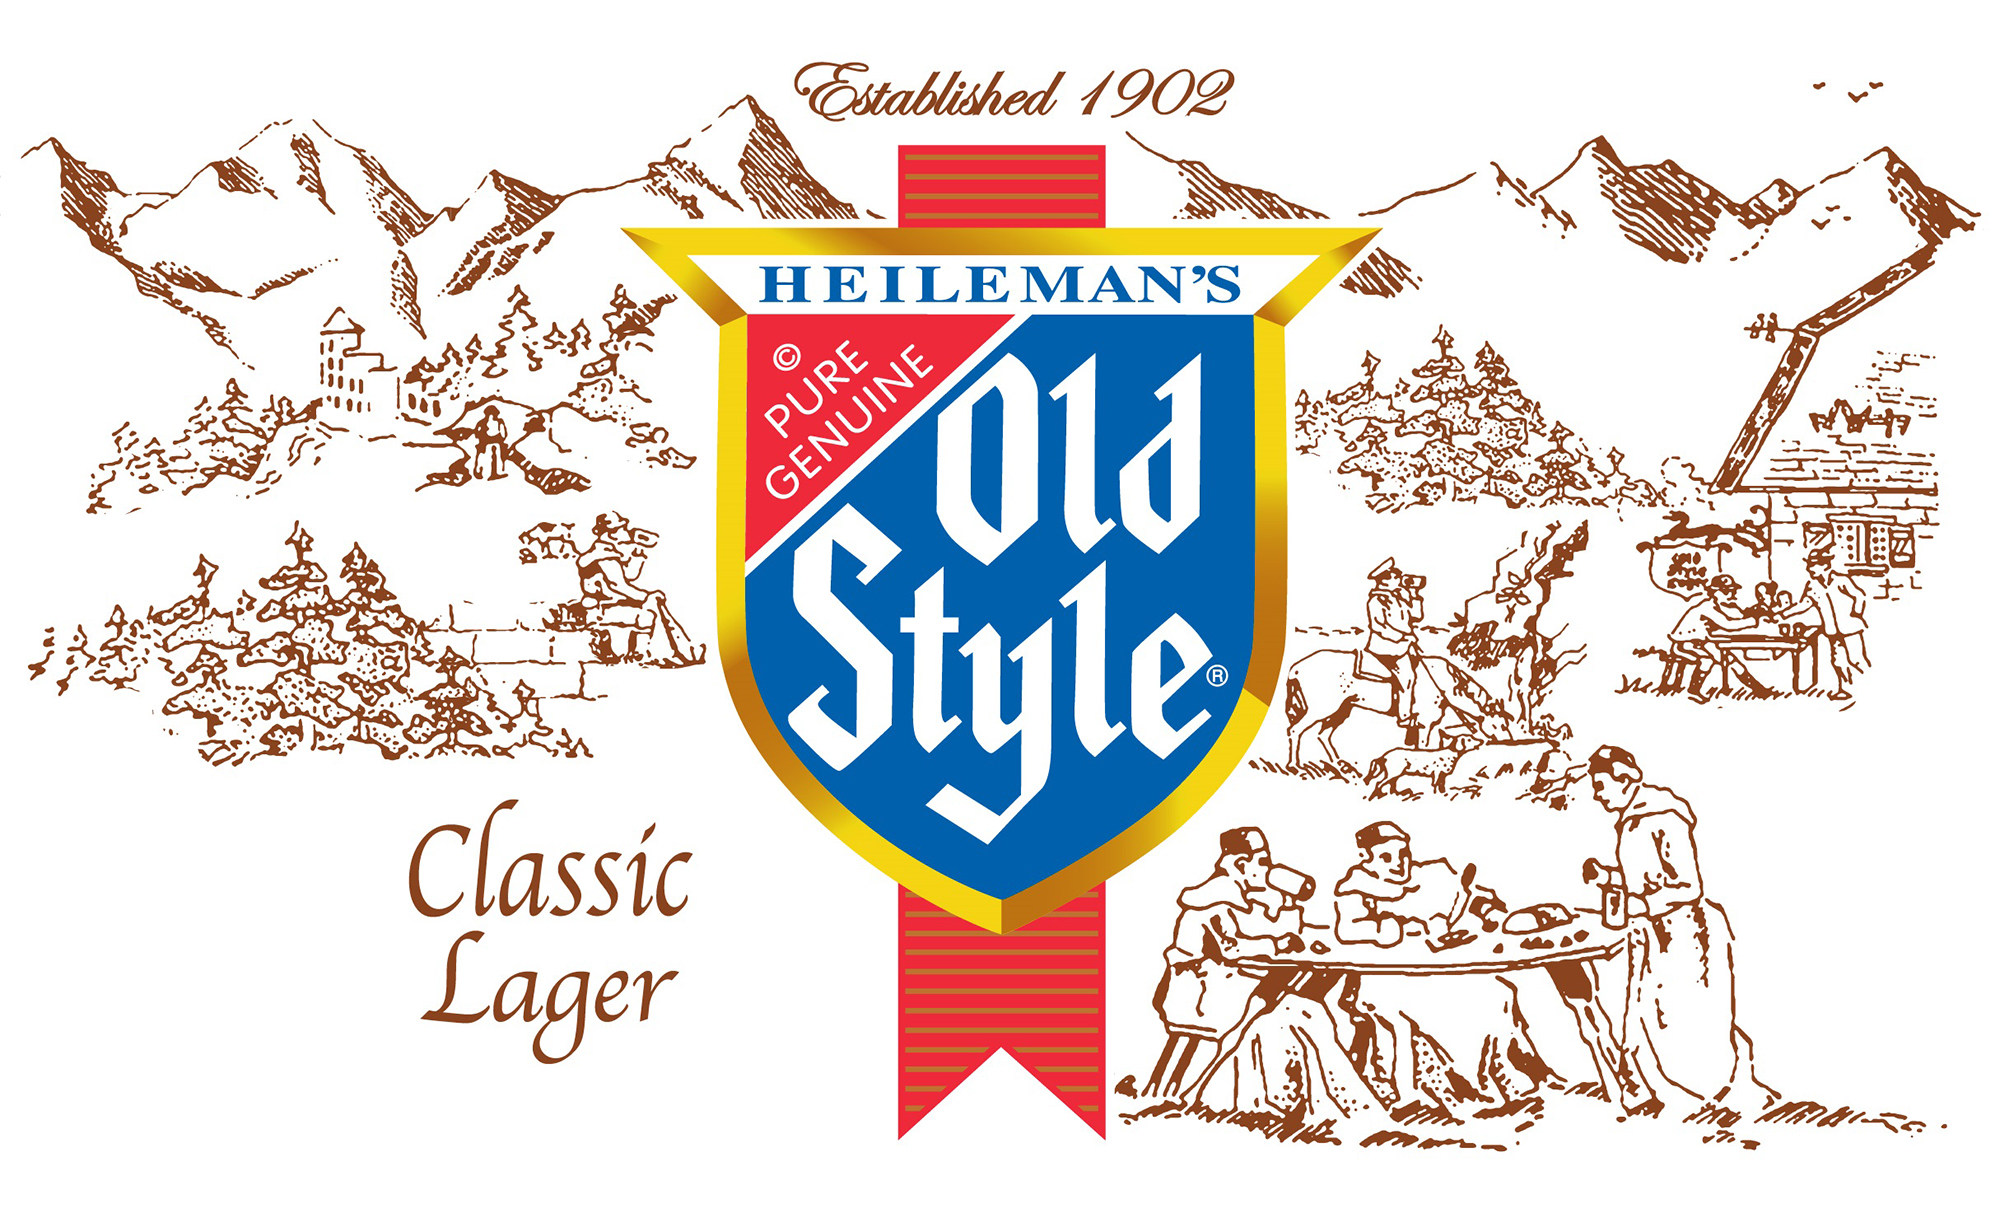 Pabst Brewing Company's Old Style